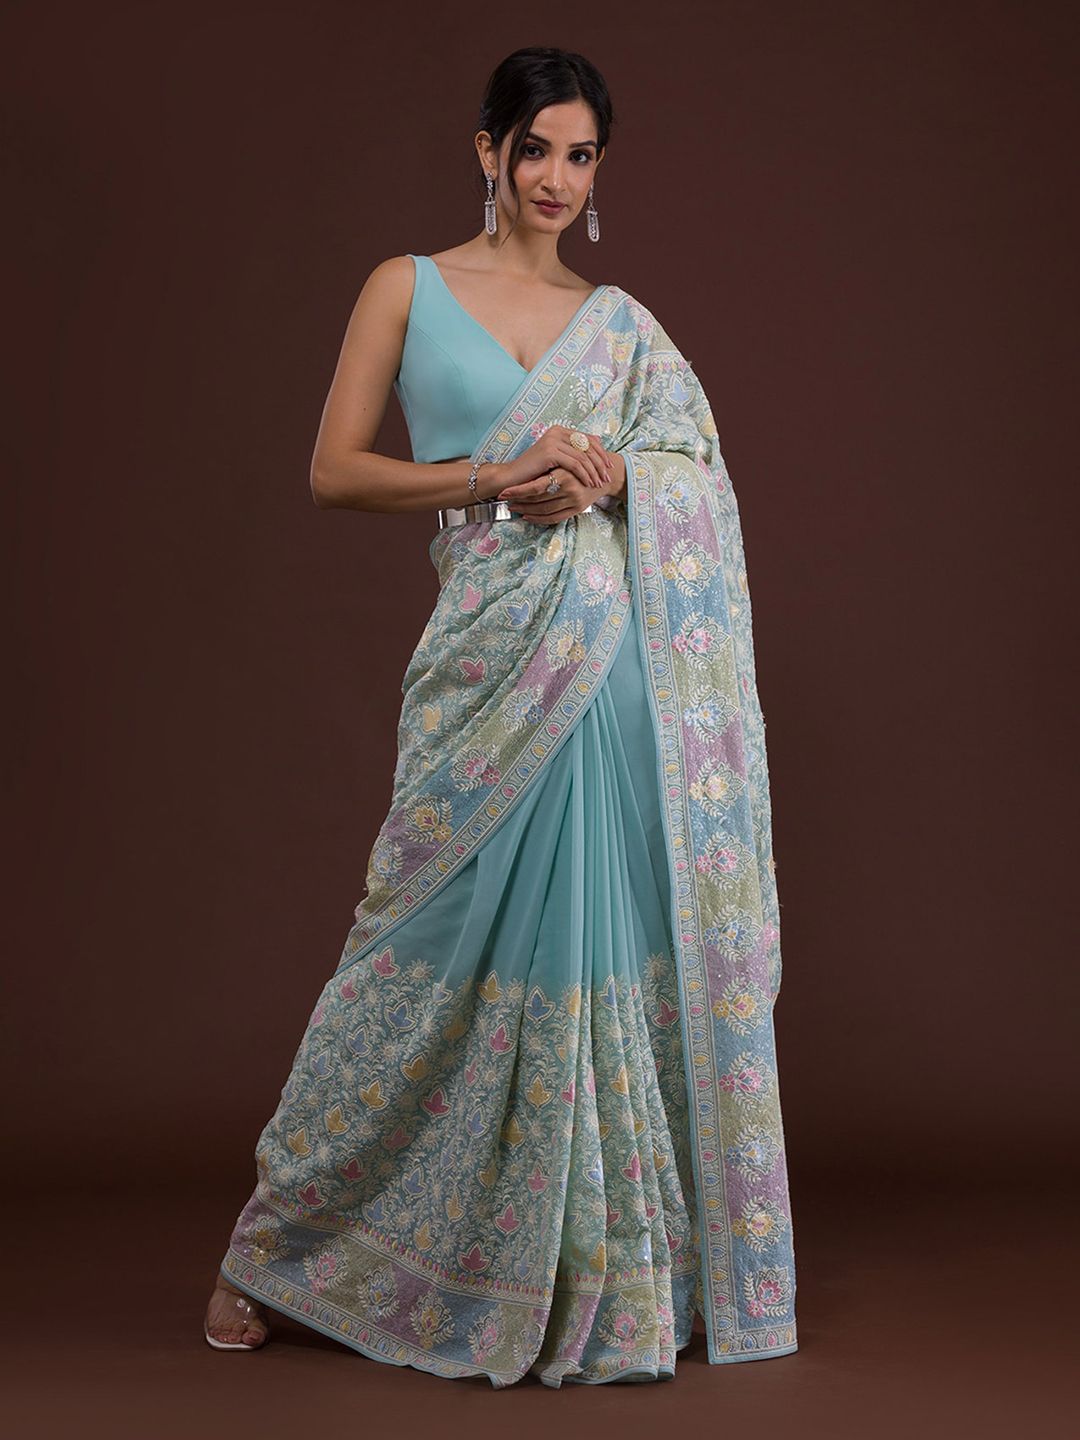 Koskii Blue & Pink Floral Embroidered Saree Price in India